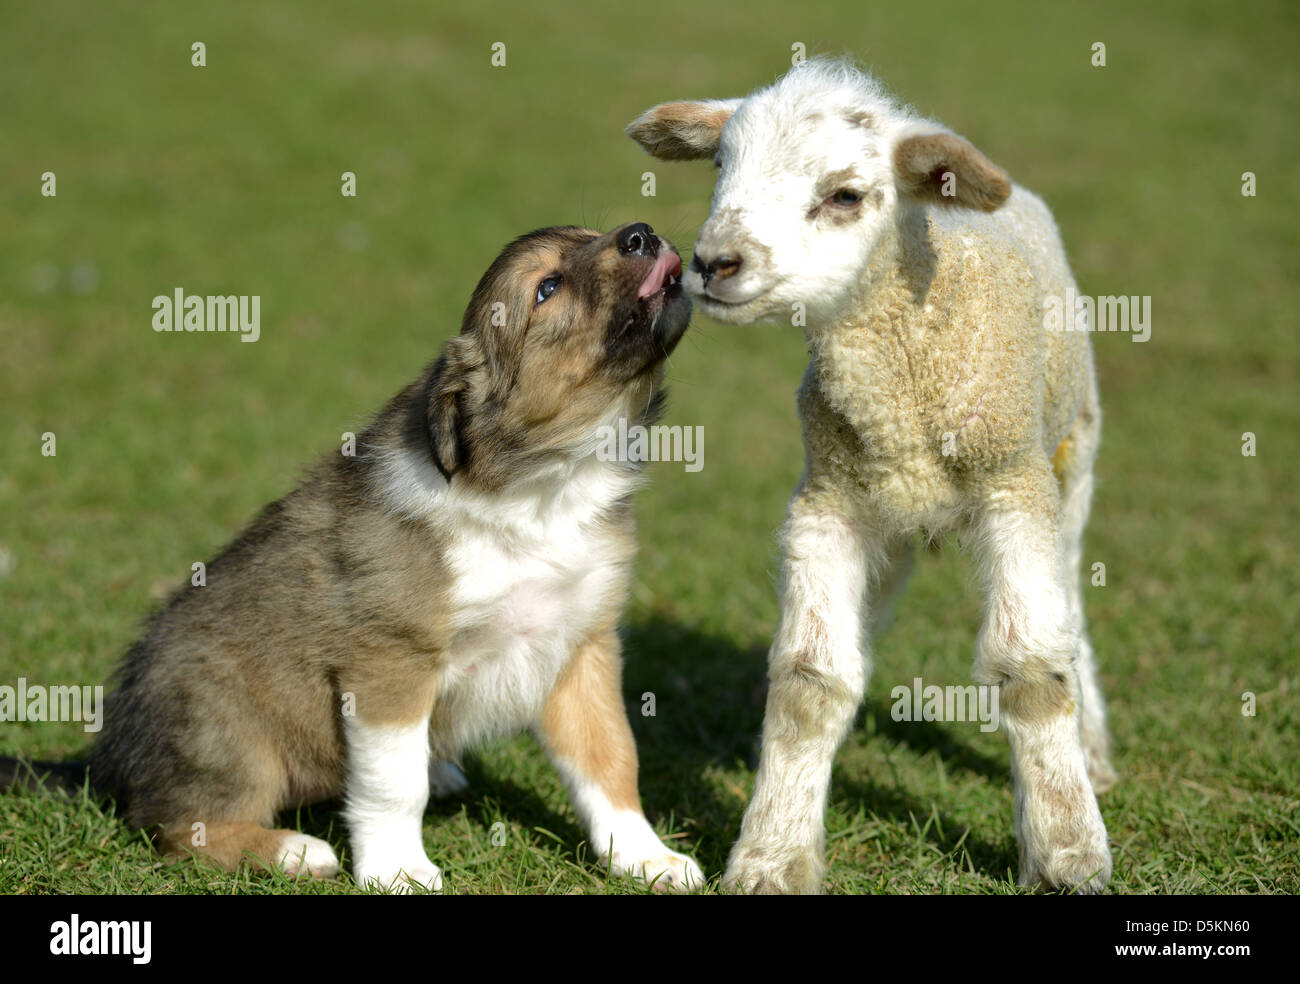 Puppy and lamb play together Stock Photo